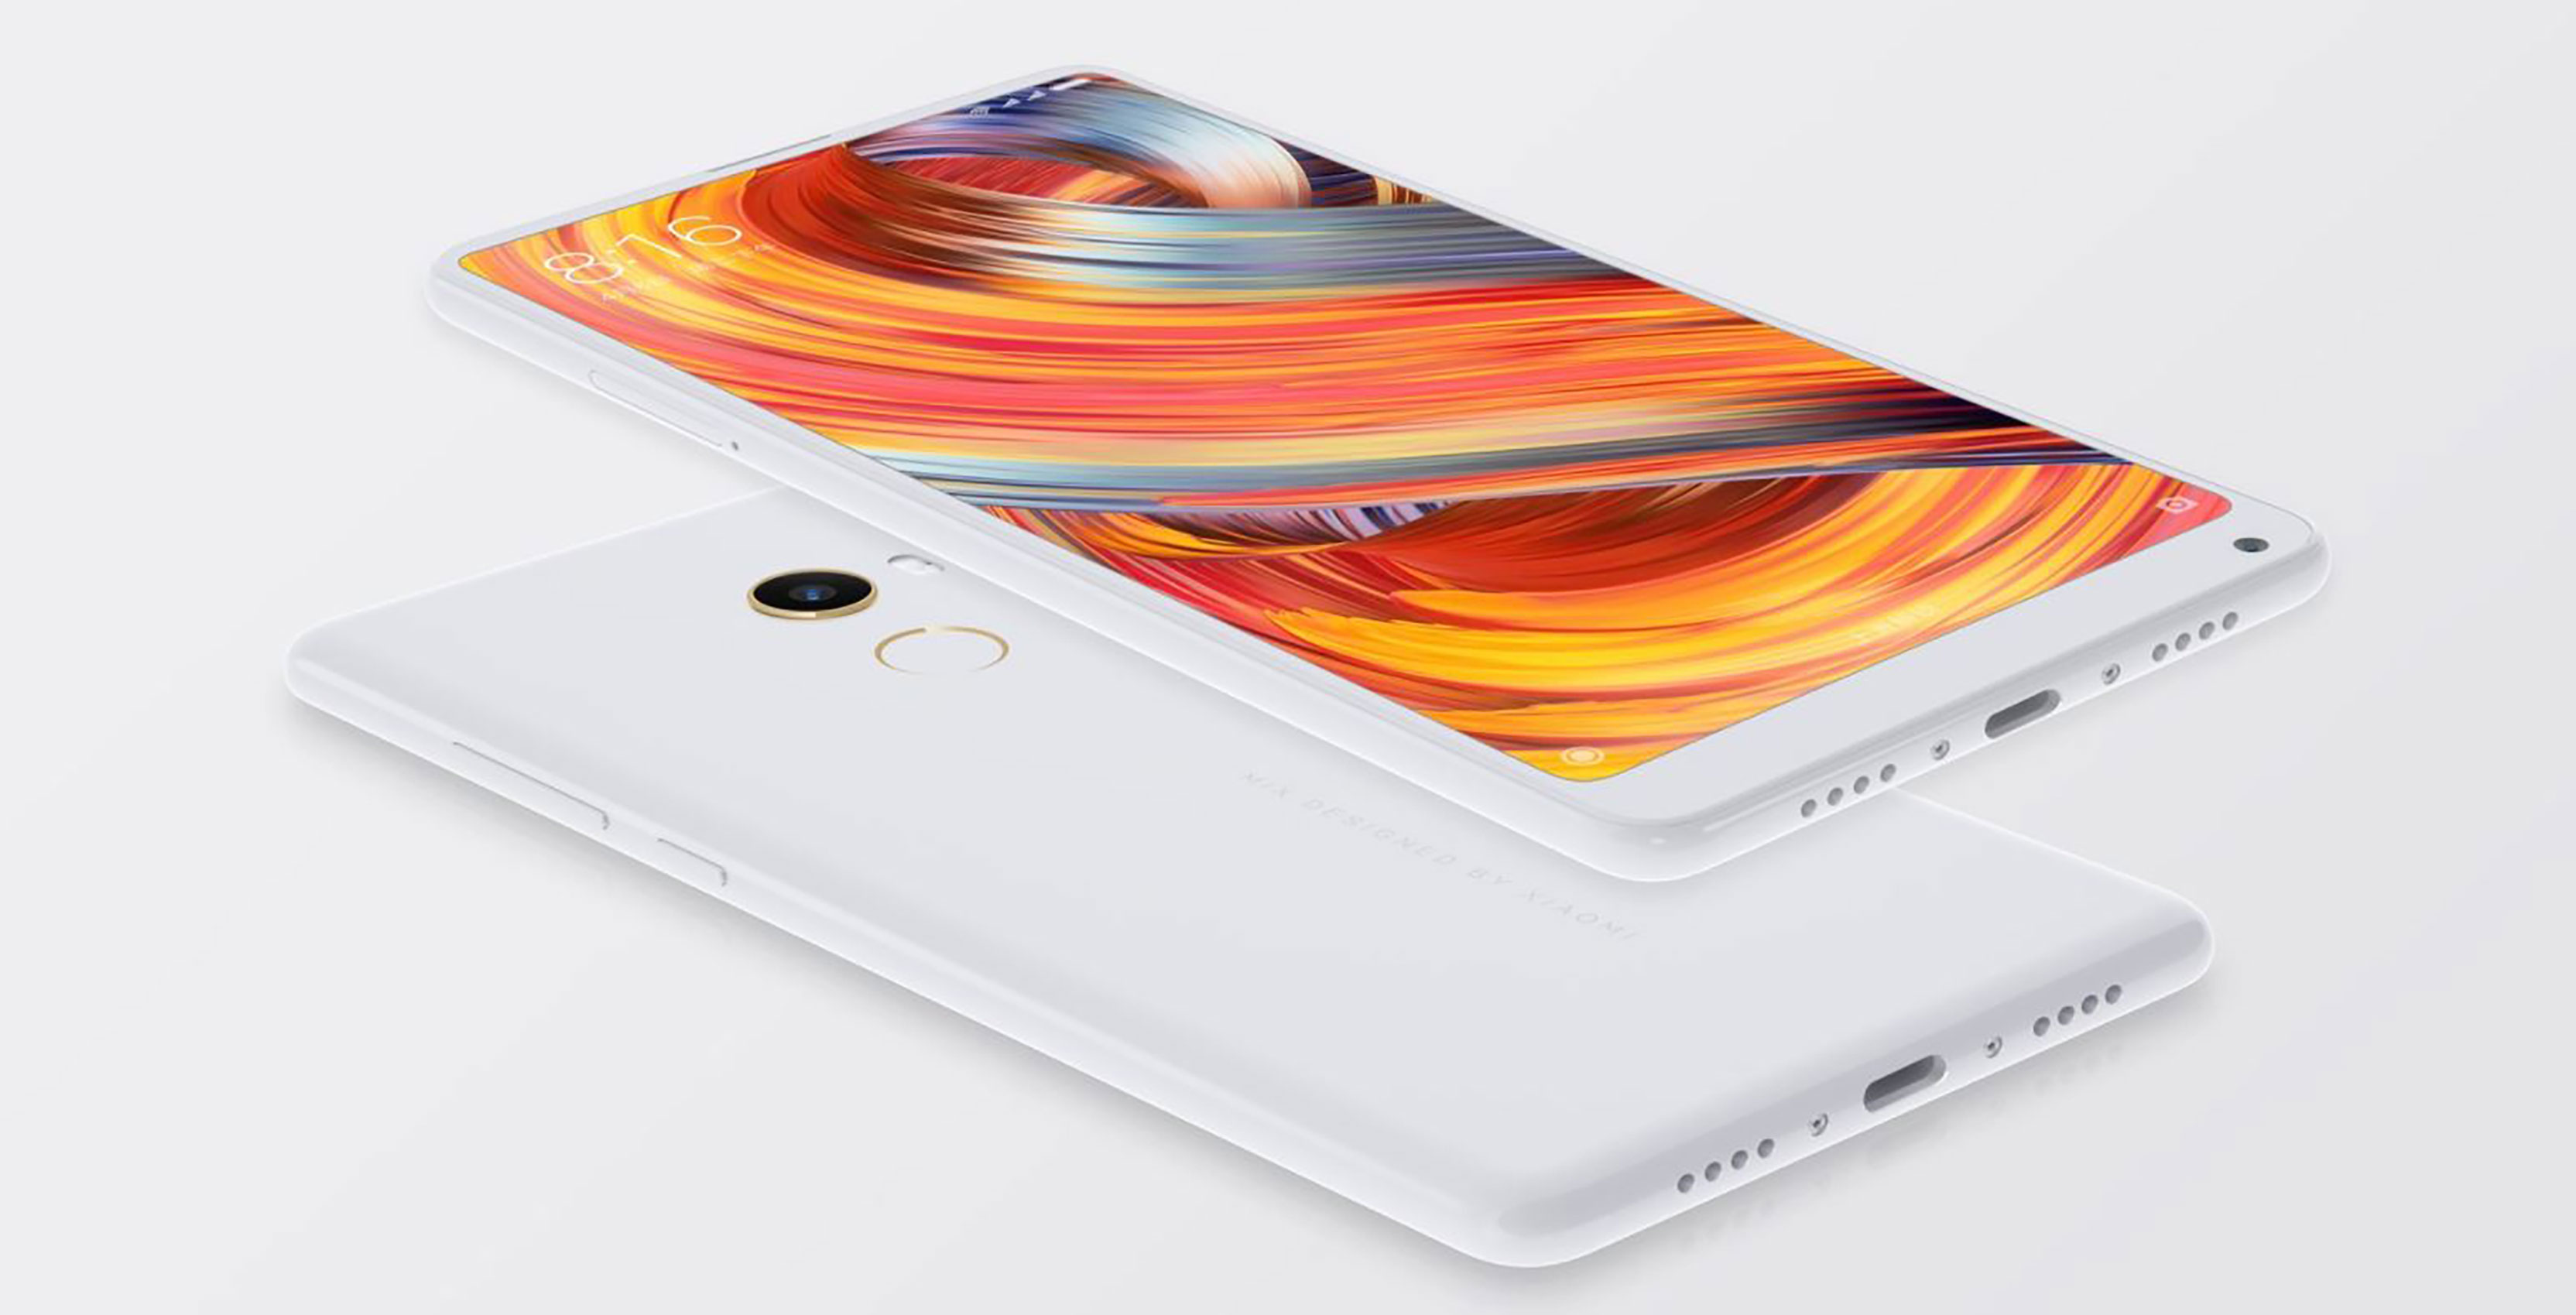 Canadians can now buy the Xiaomi Mi Mix 2 for nearly $1,000